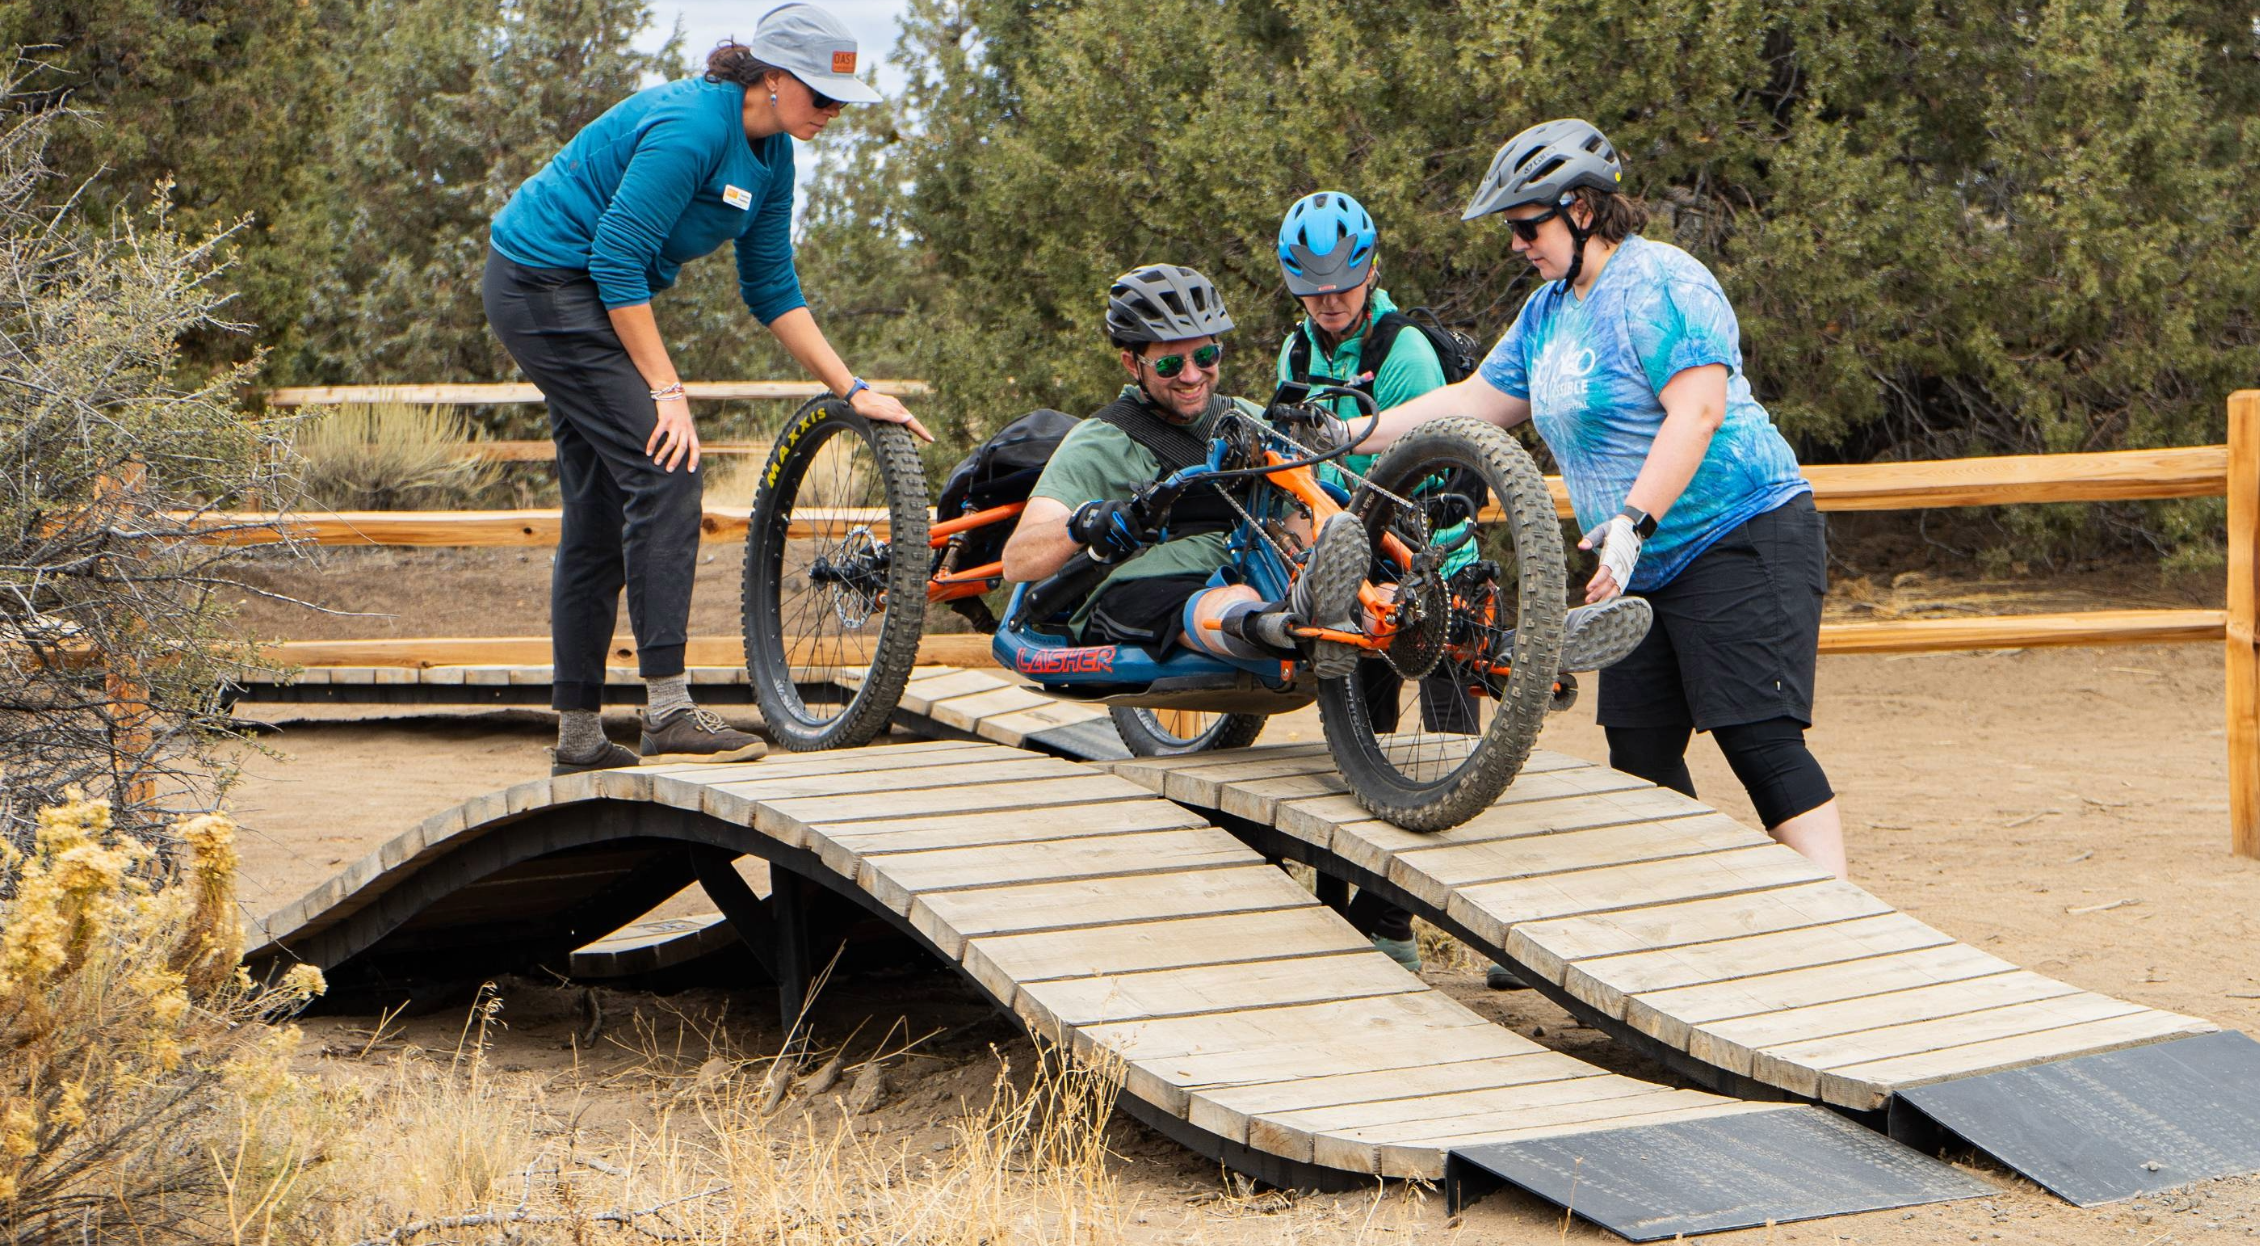 Three OAS volunteers support an adaptive athlete in an aMTB hand-cycle on a wooden ramp as they navigate balance. The athlete's smile visible.